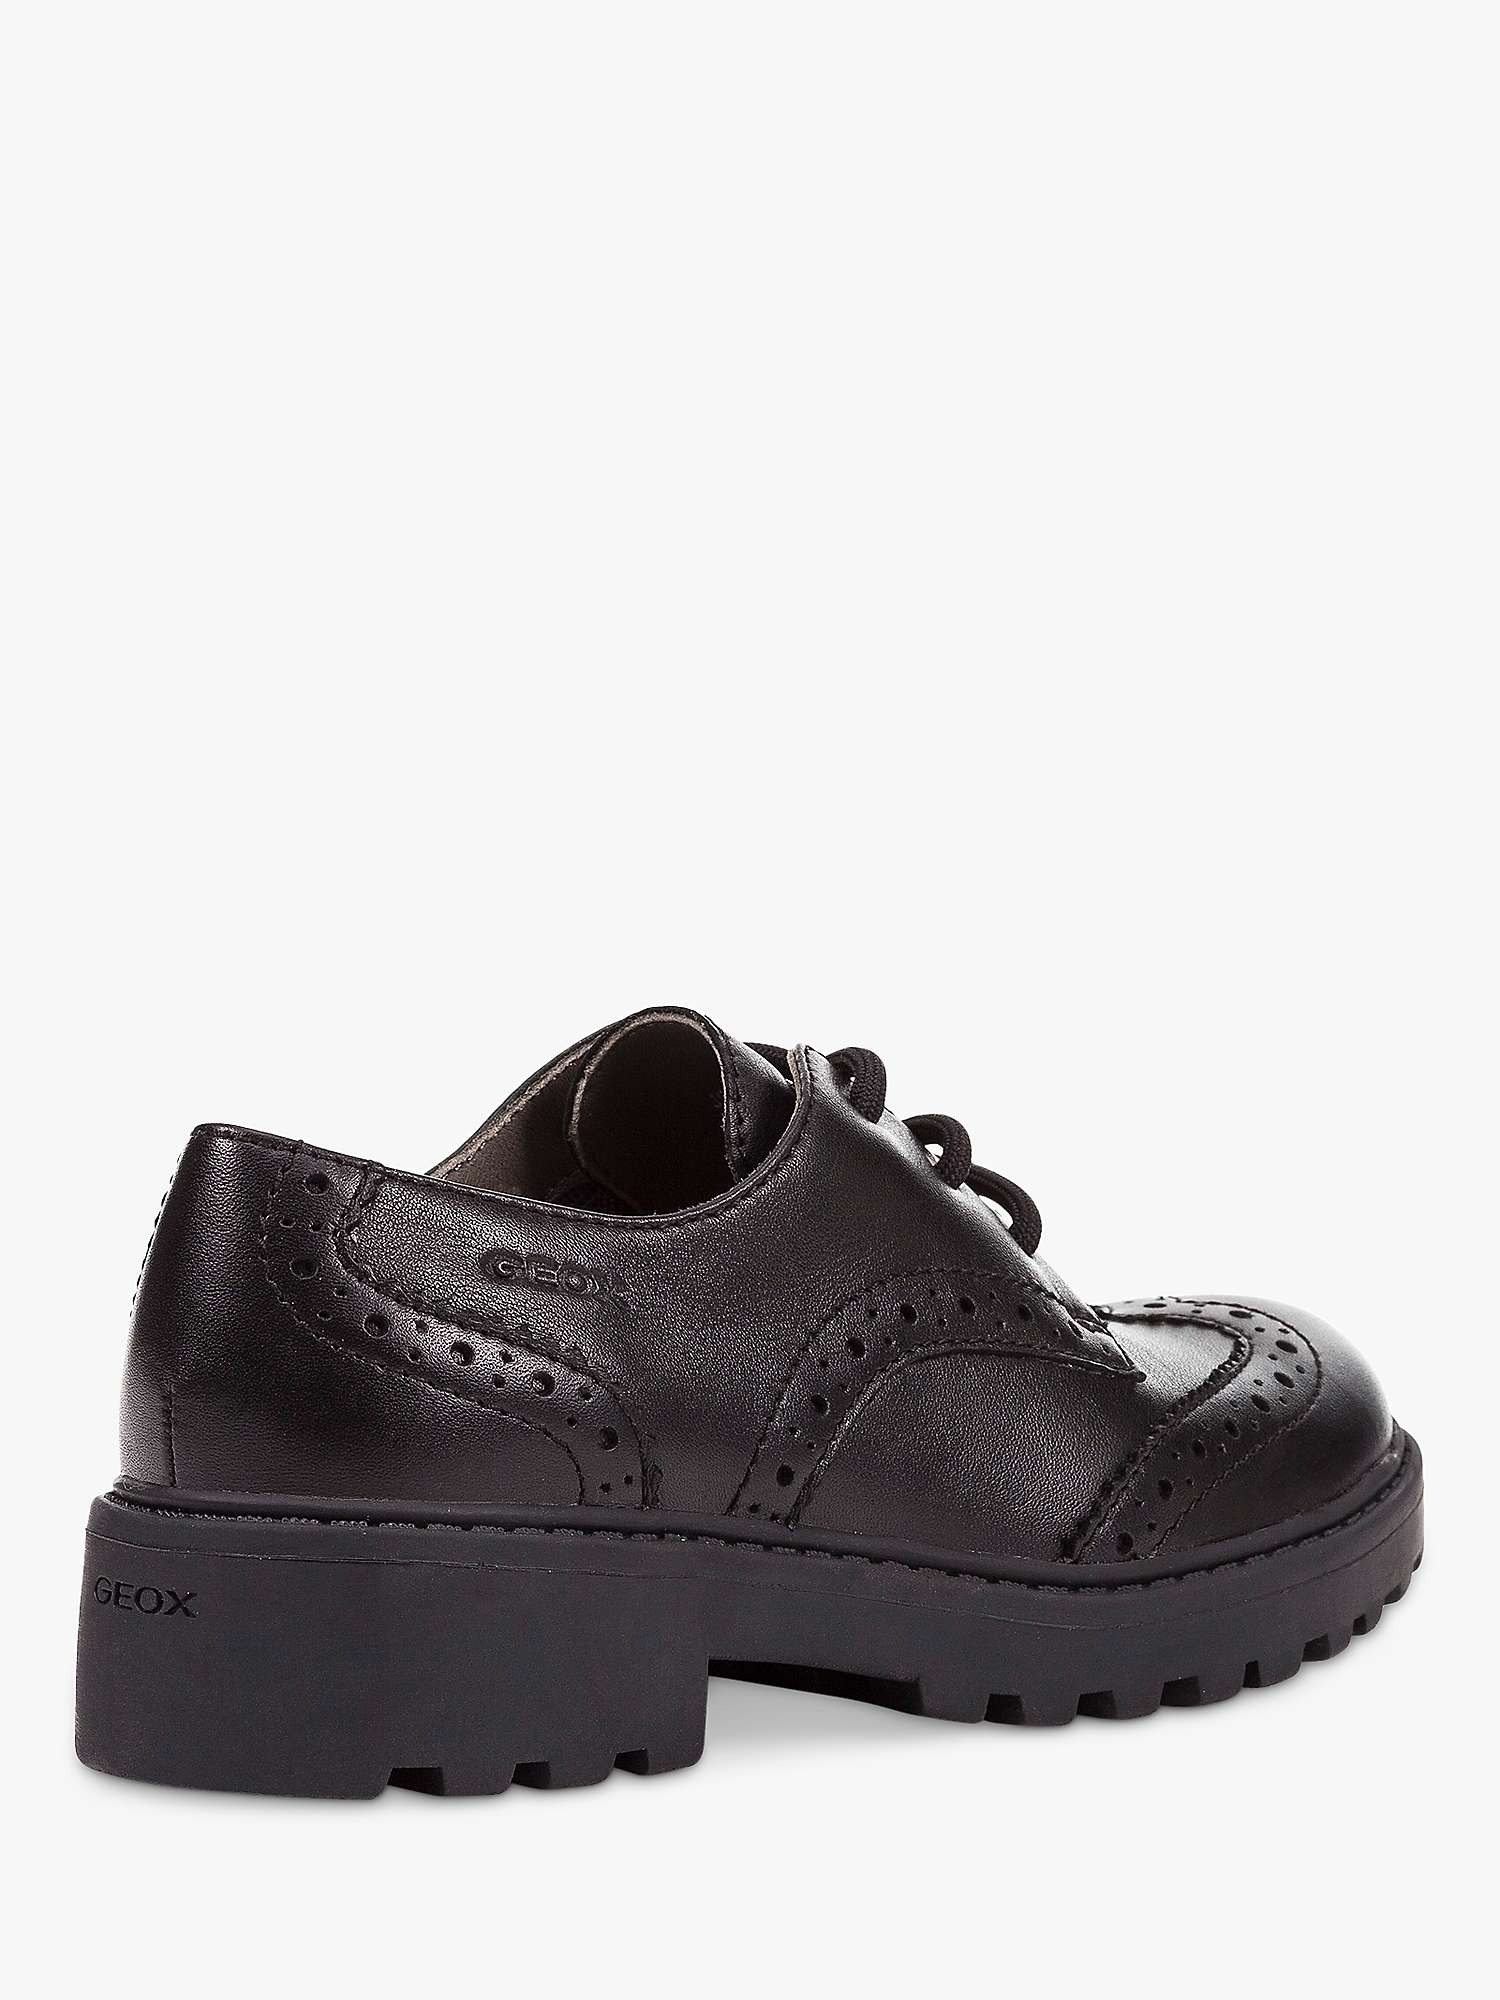 Buy Geox Kids' Casey Lace Up Brogue School Shoes, Black Online at johnlewis.com